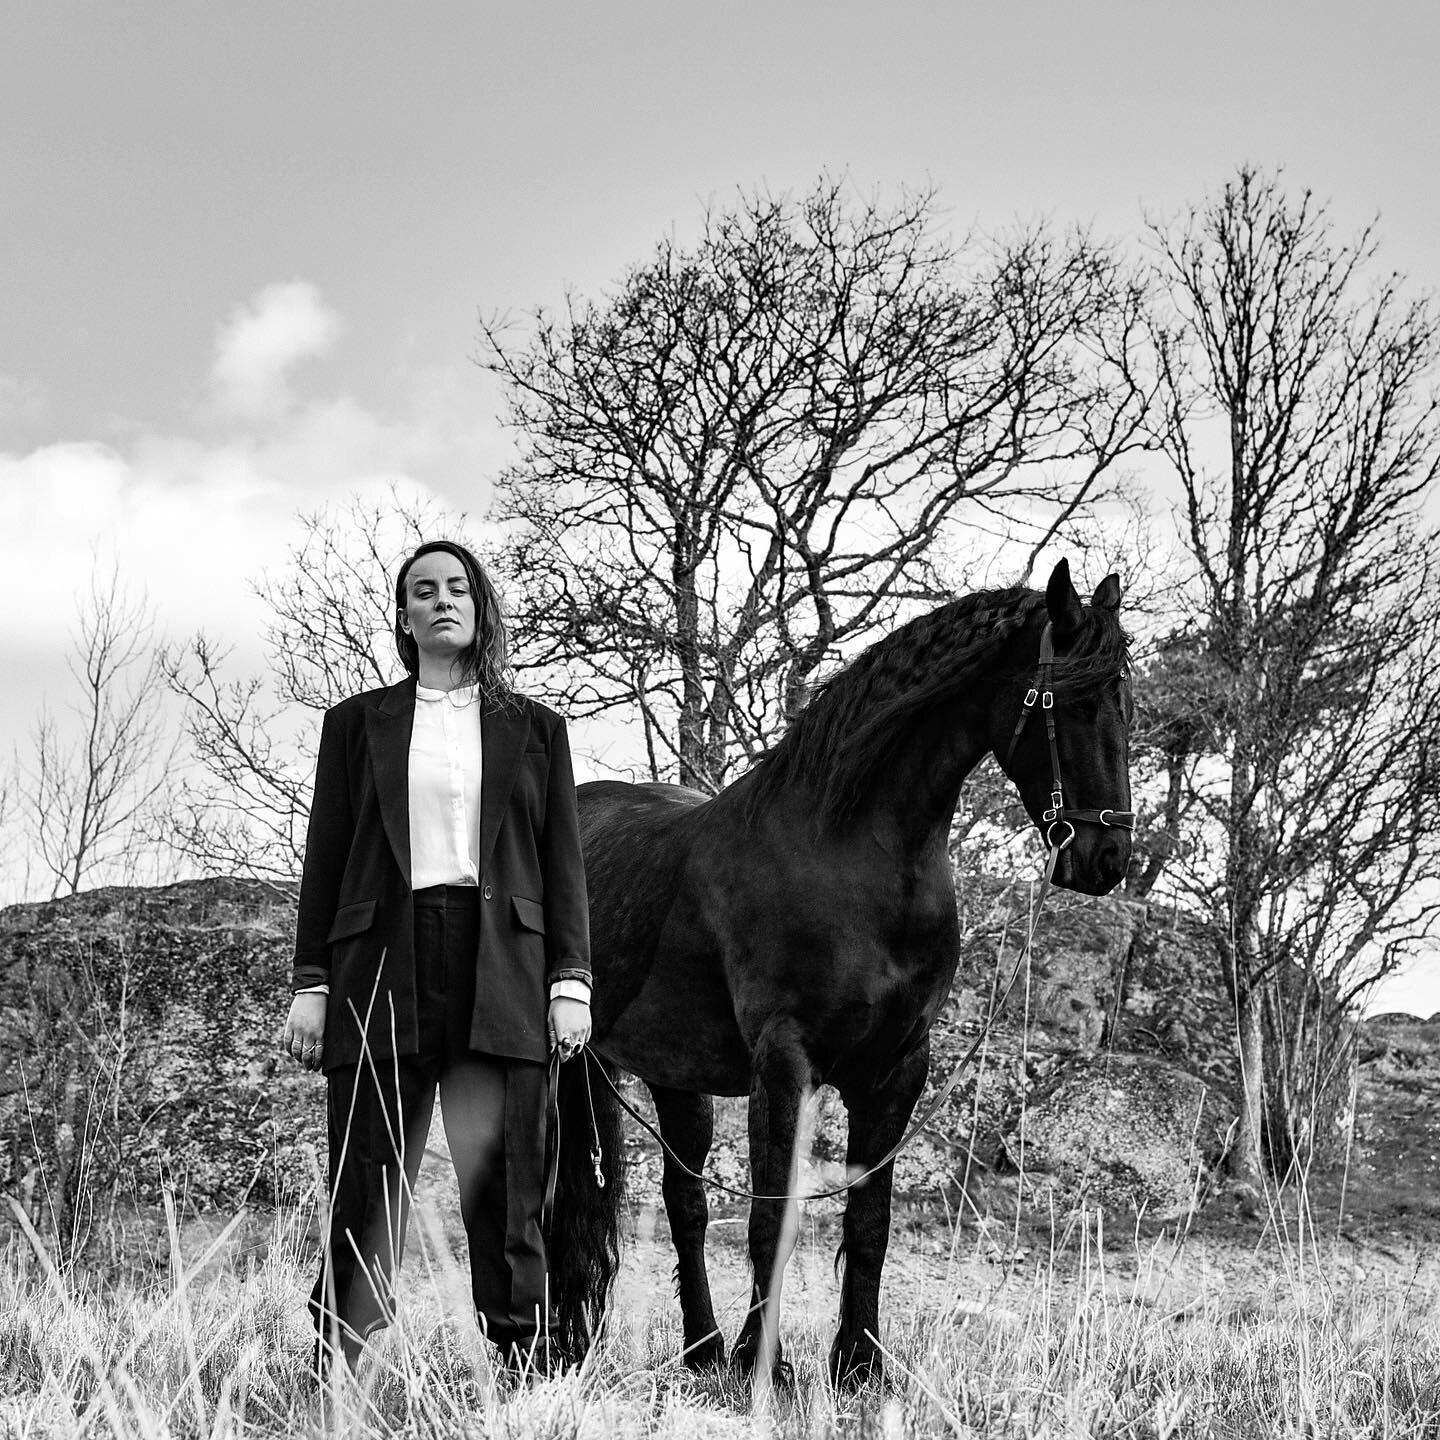 This is the cover photo for Songs of wounds and healing, taken by @amandaandreas off course! 🥰Recently I got the question if it is my horse on the photo, and no it&rsquo;s not. I wish! 😅 The horse is called Carmen and is owned by the generous Emeli